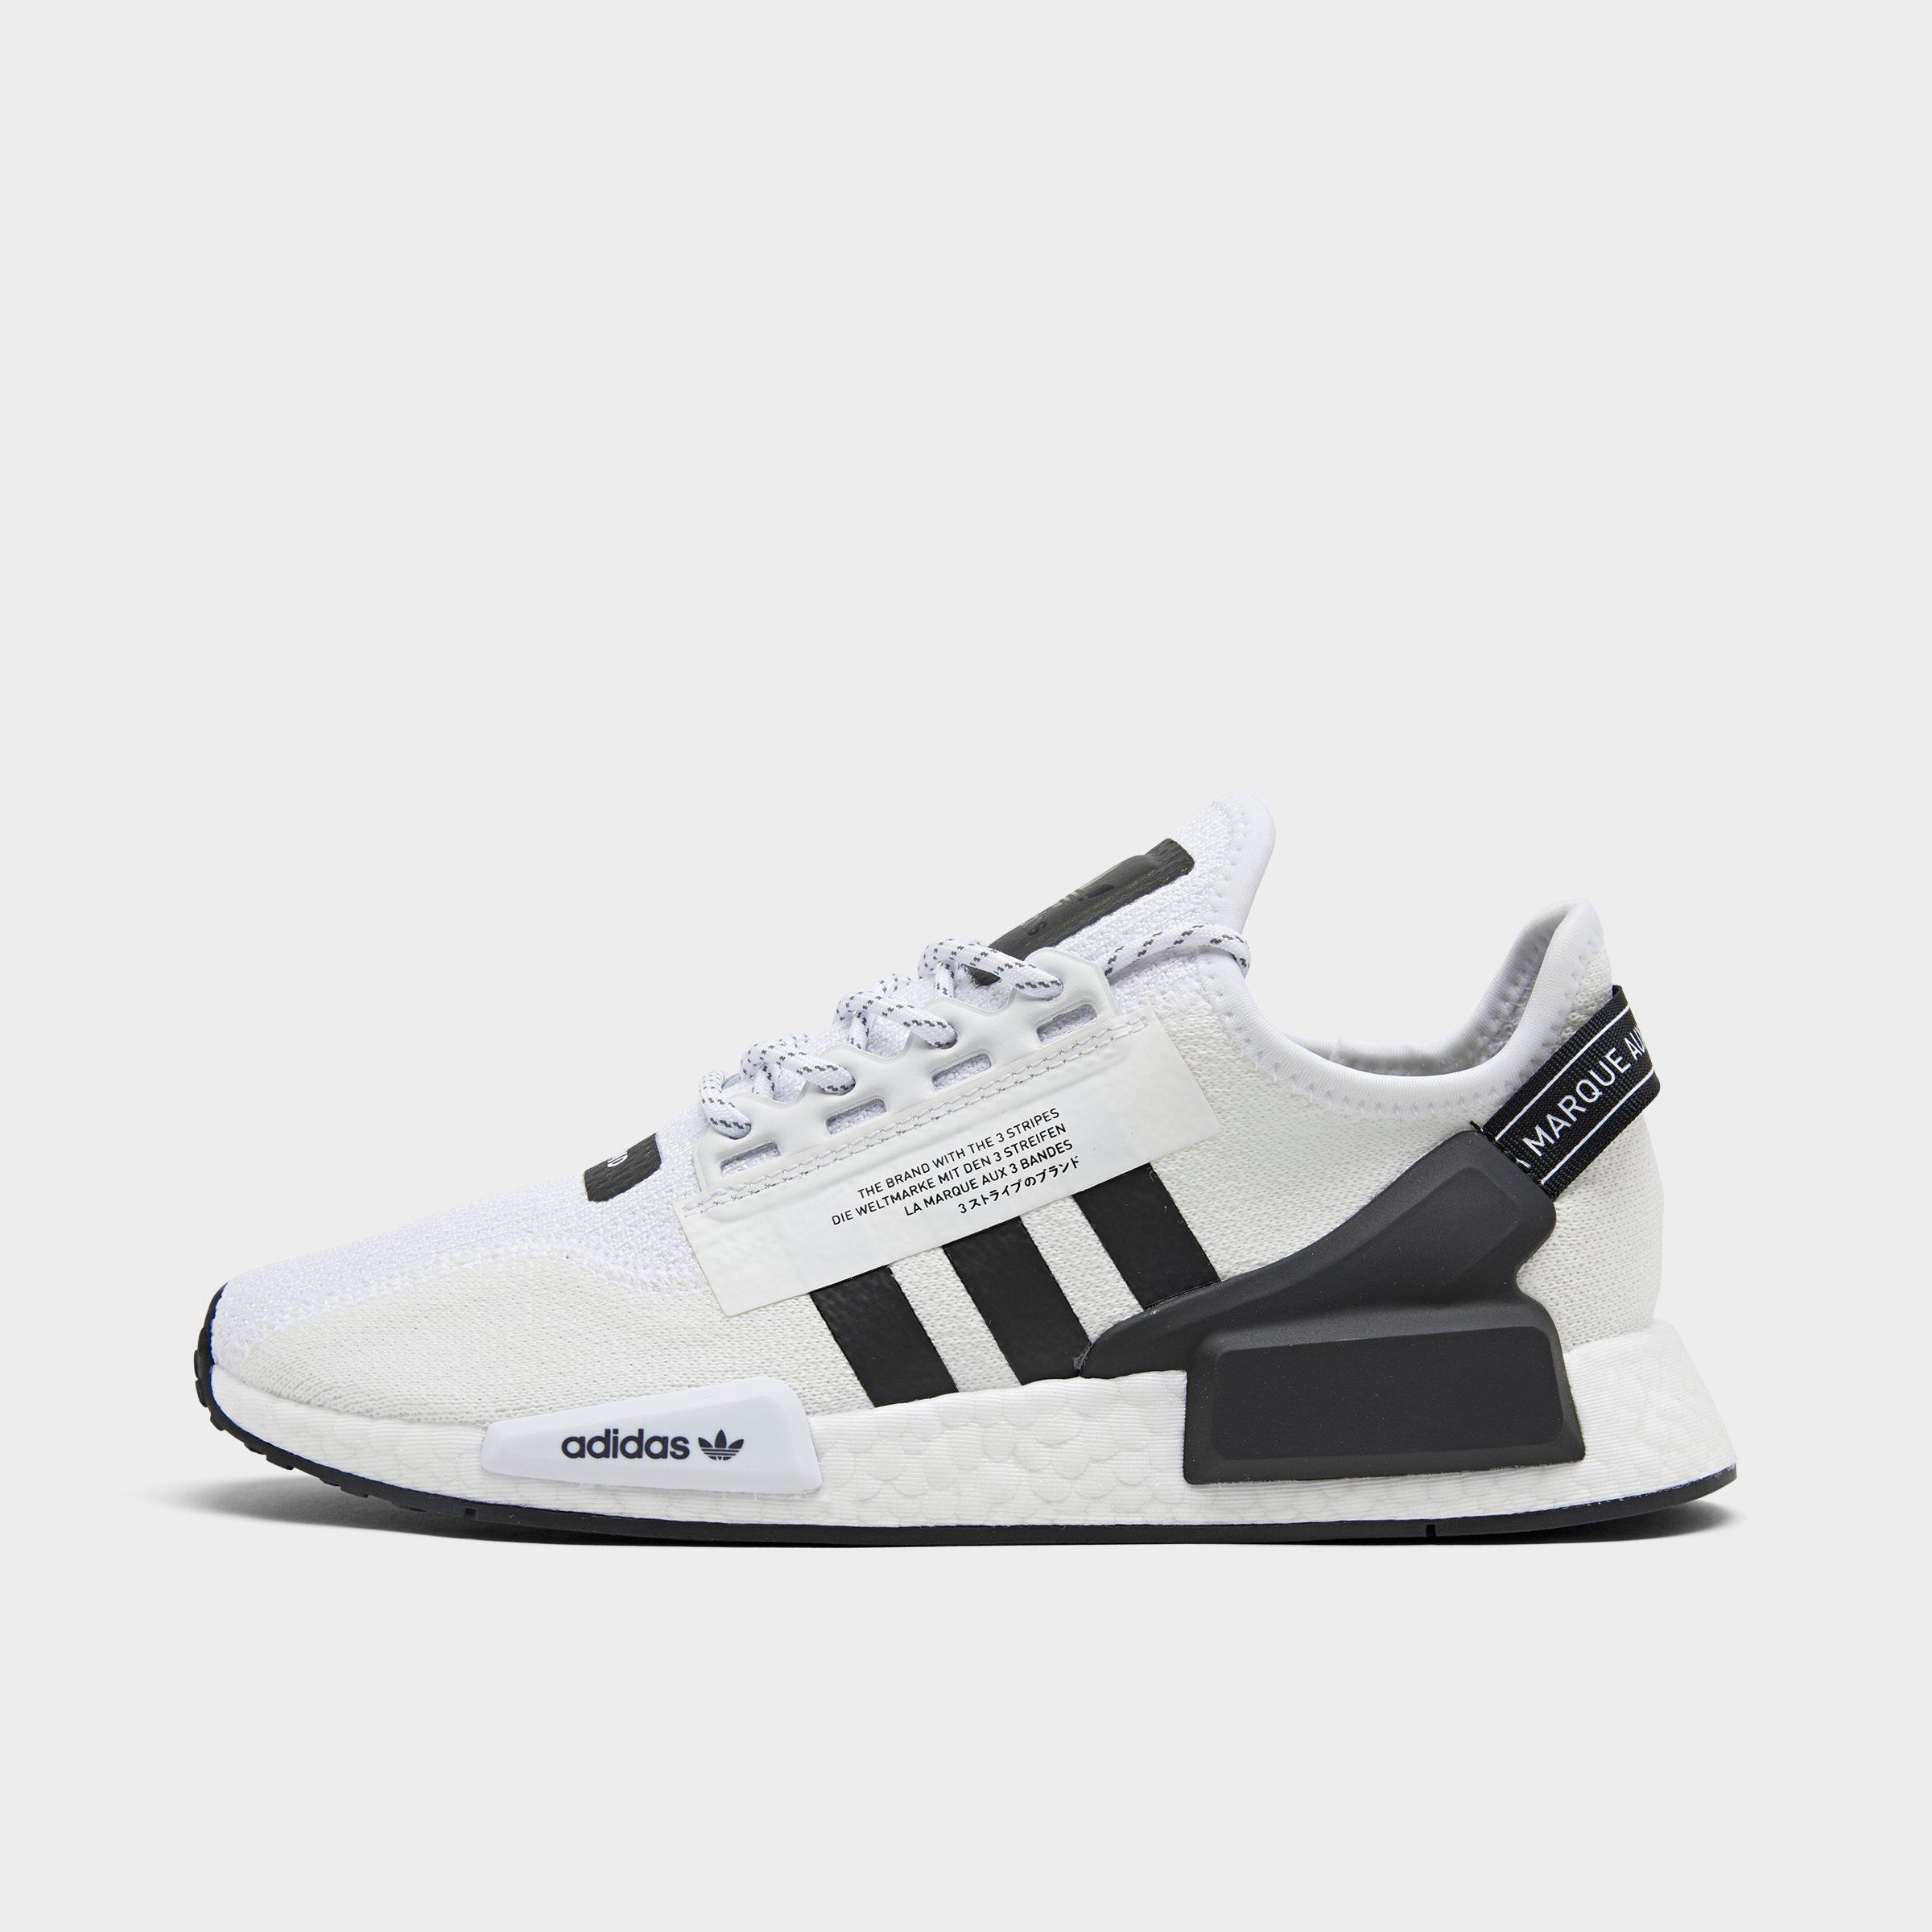 Adidas NMD R1 Core Black Trace Scarlet Shopee Thailand